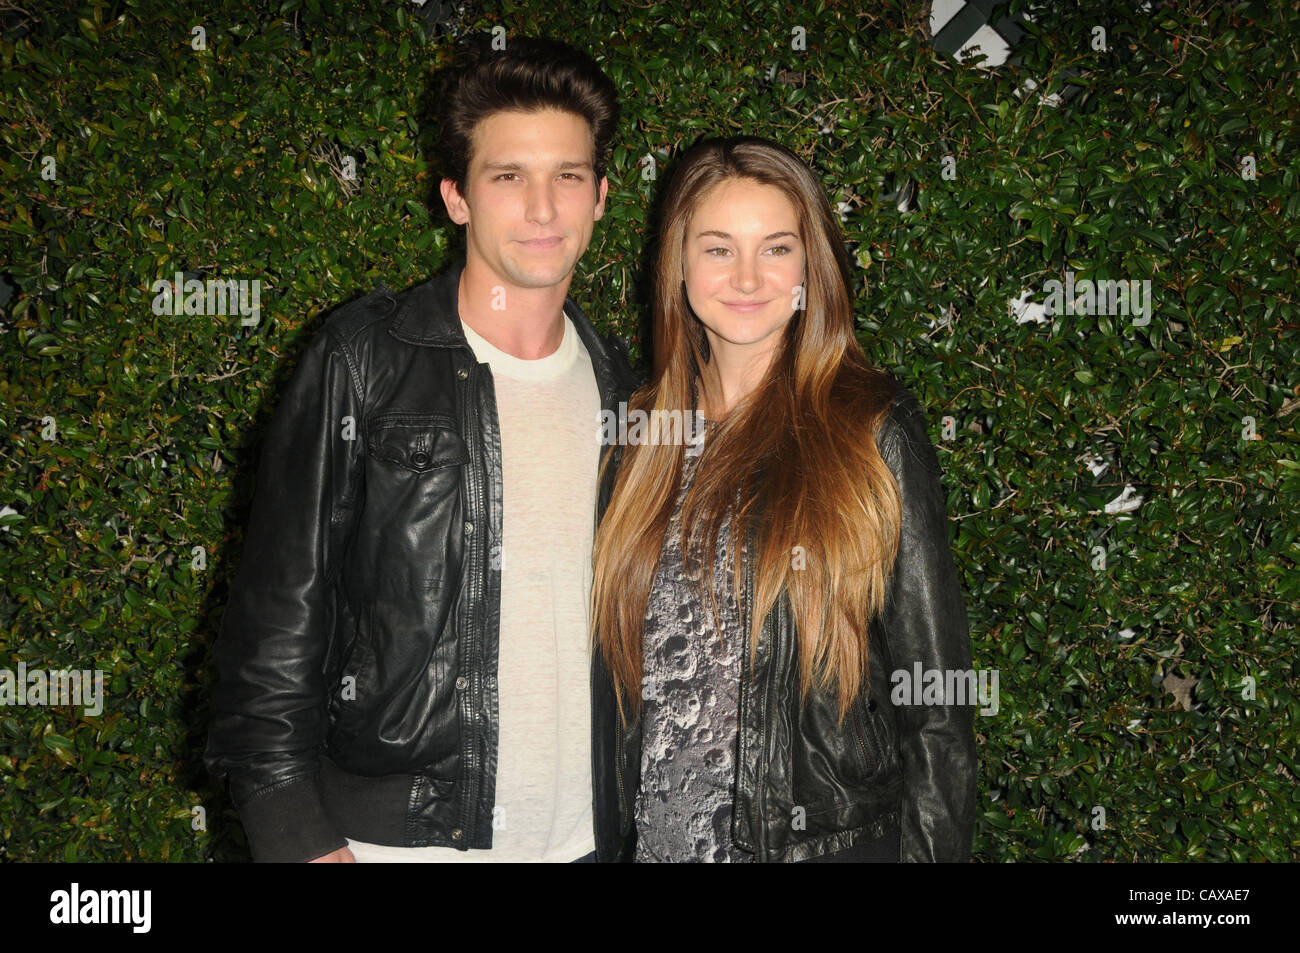 May 1, 2012 - Los Angeles, California, U.S. - Daren Kagasoff, Shailene Woodley Attending the ABC Family stars at the West Coast Upfronts held at the Sayers Club in Hollywood, California on May 1, 2012. 2012(Credit Image: Â© D. Long/Globe Photos/ZUMAPRESS.com) Stock Photo